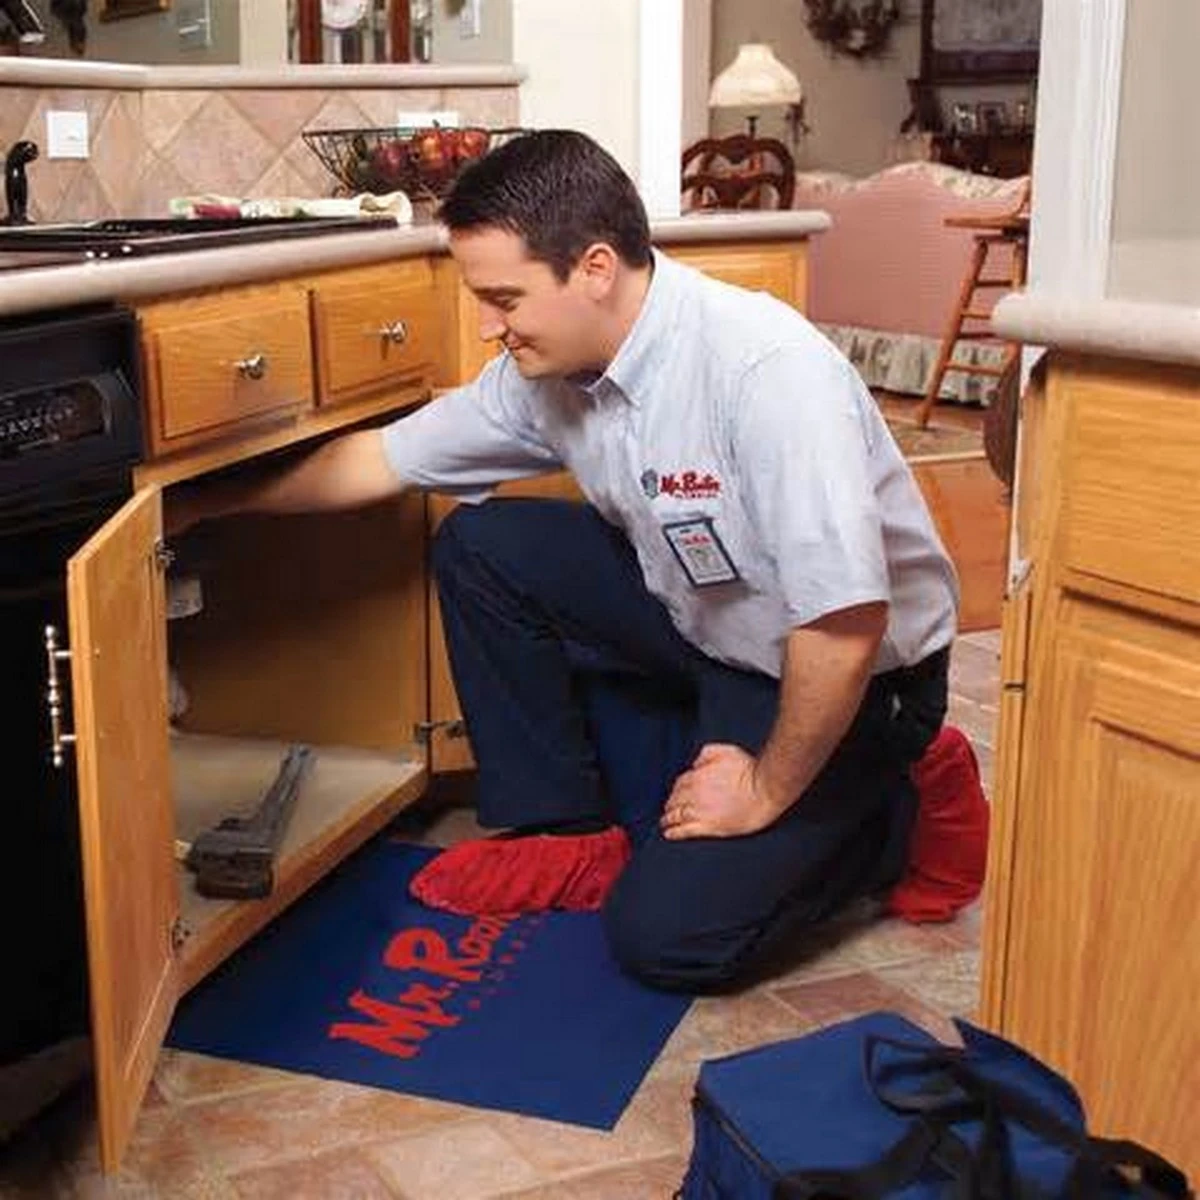 A plumber from Mr. Rooter plumbing inspecting the drain pipes underneath a kitchen sink.